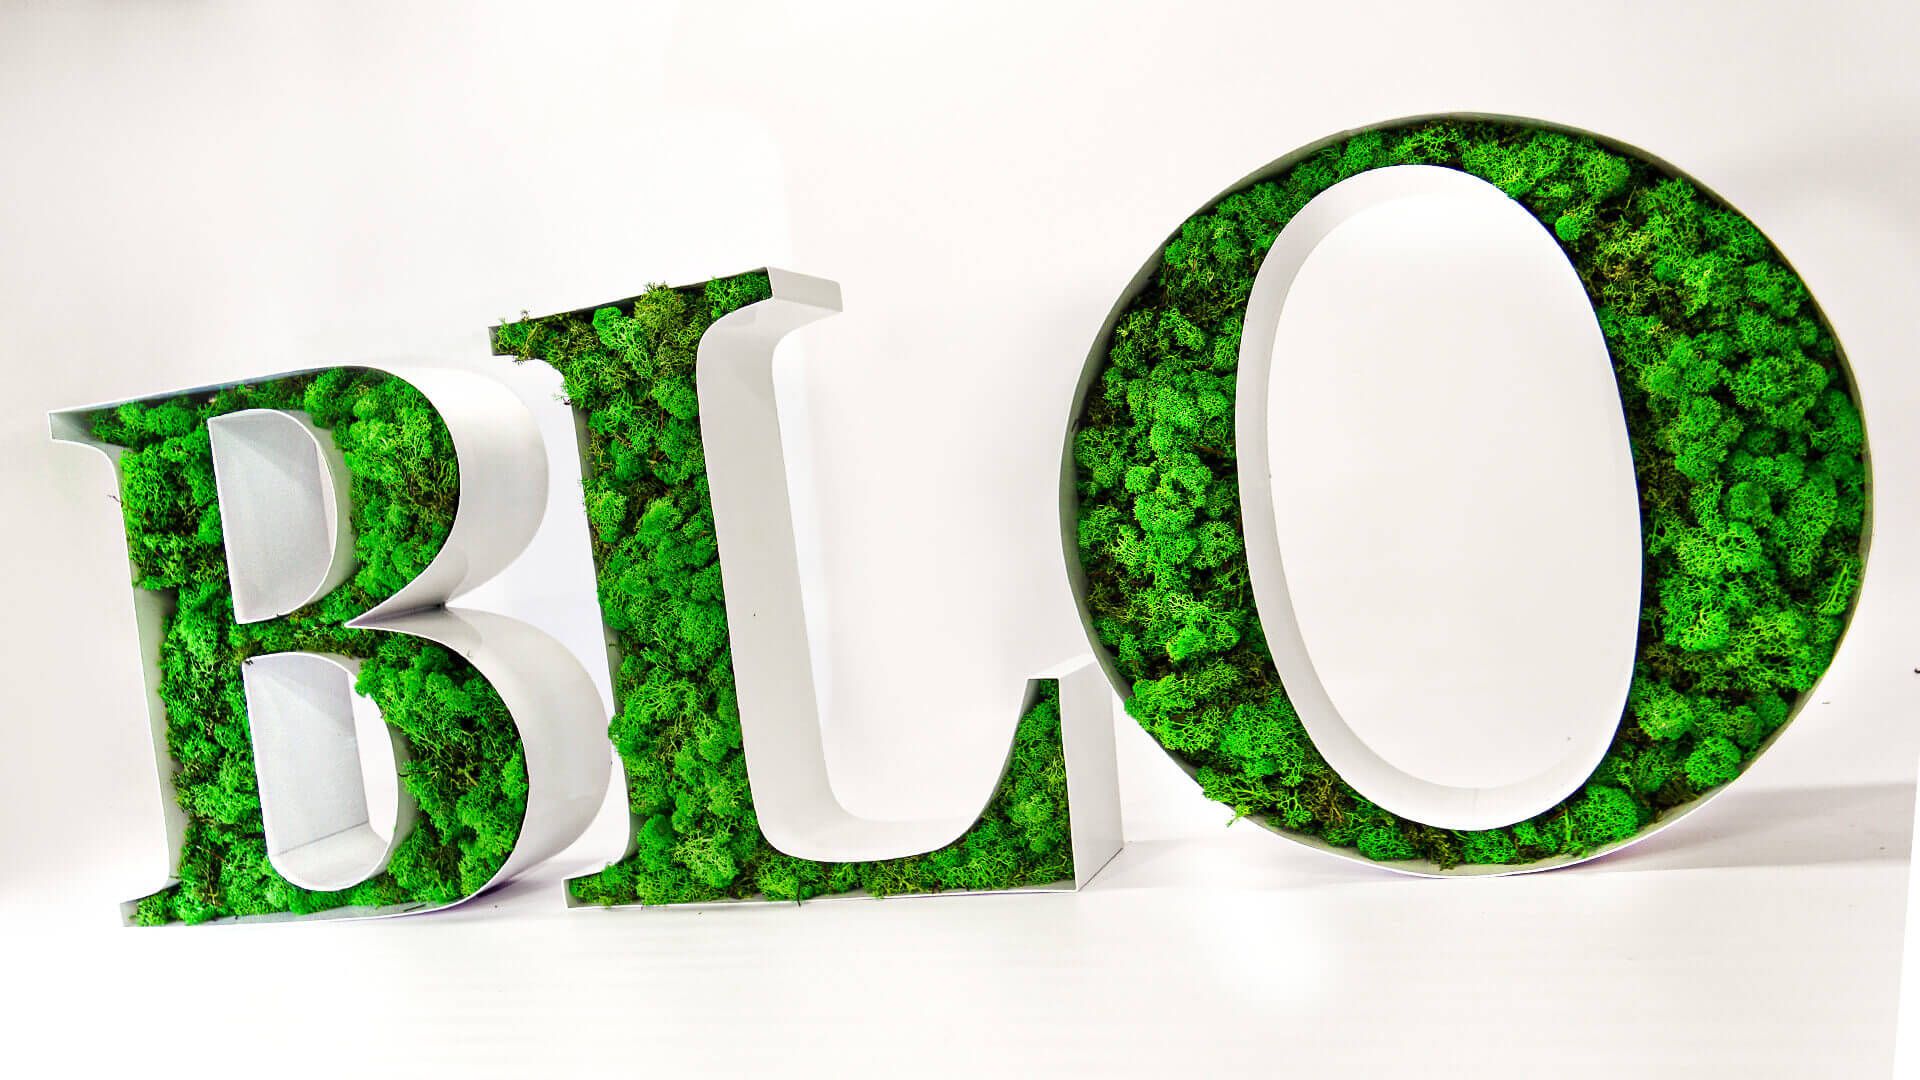 BLO decorative letters - BLO decorative letters, filled with moss.